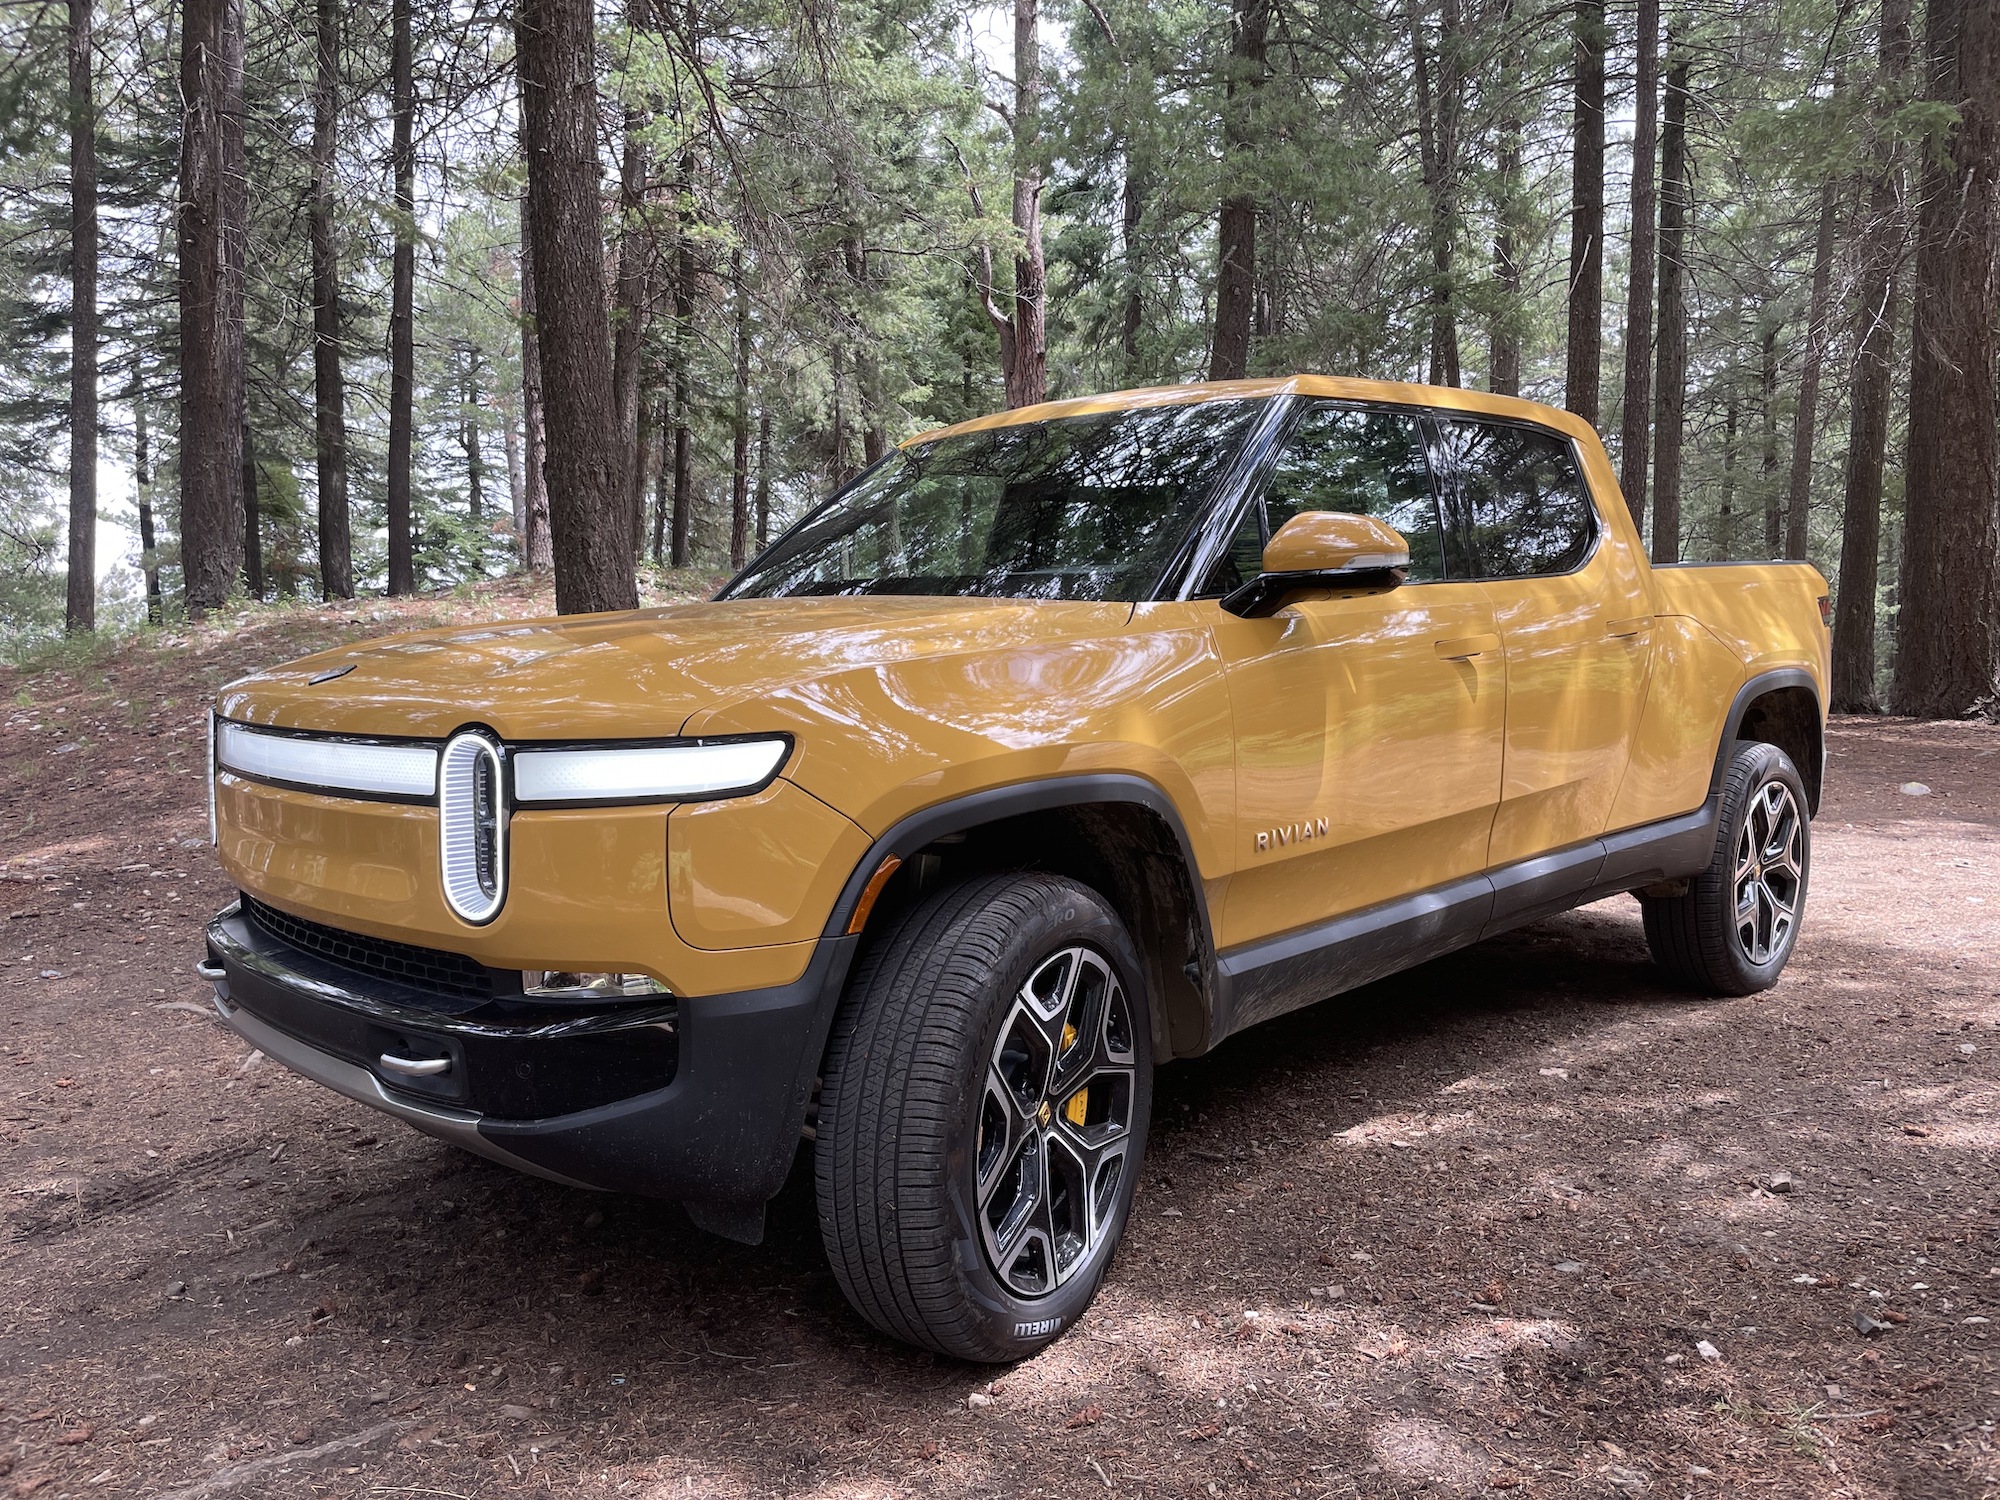 Rivian Takes Swift Action and Offers Complimentary Loaners for Vehicle Recall